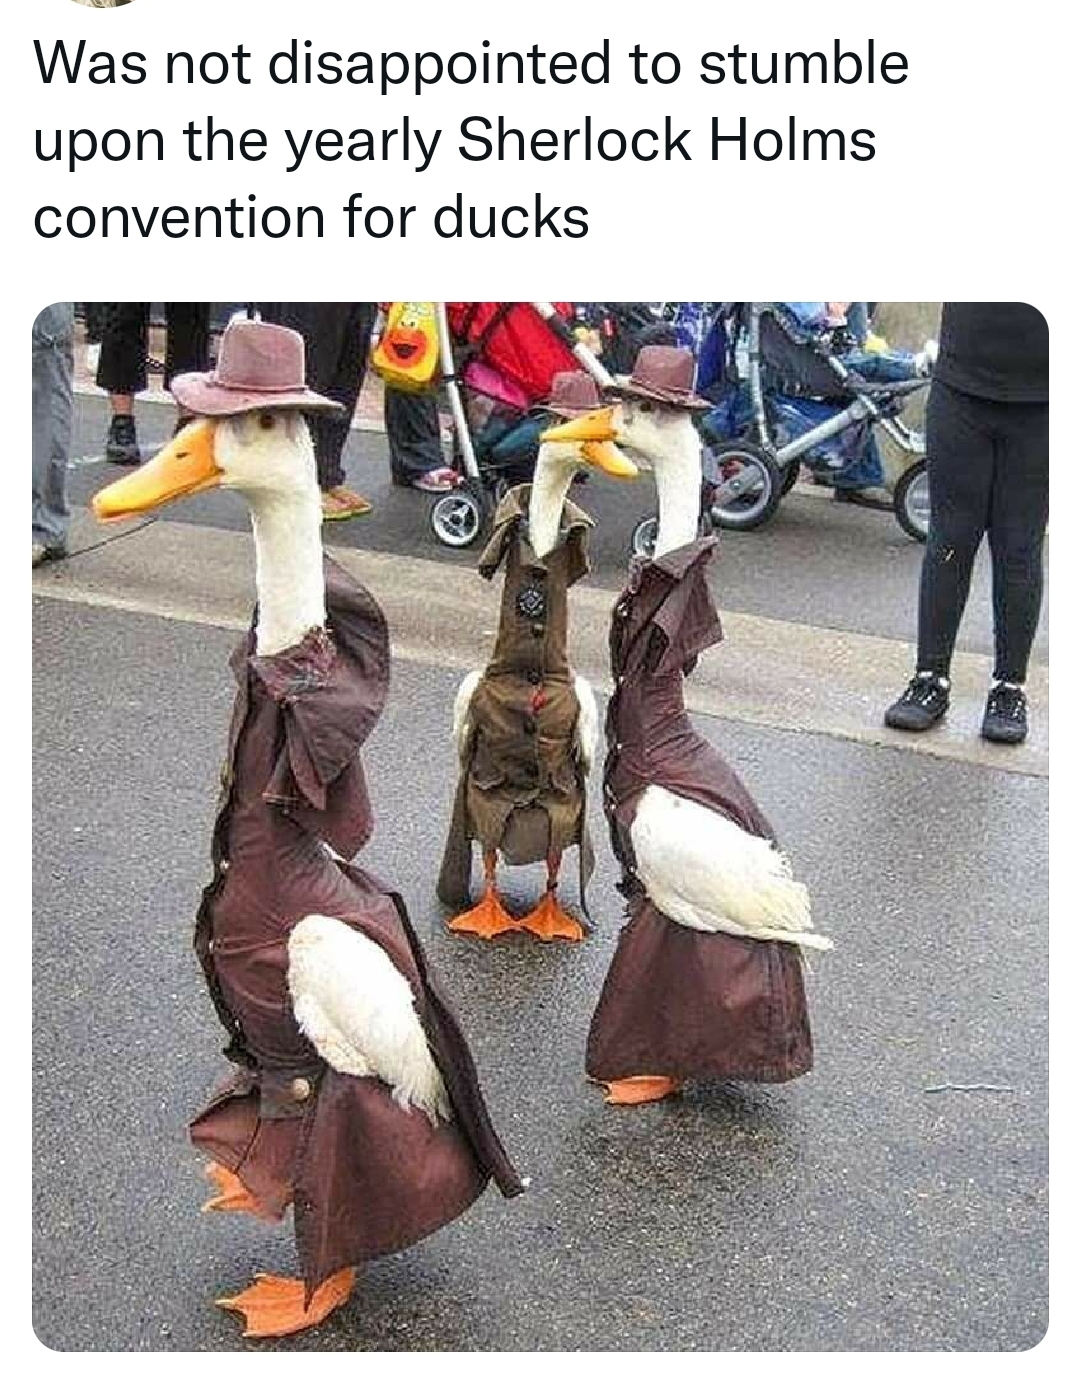 monday morning randomness - ducks wearing trench coats - Was not disappointed to stumble upon the yearly Sherlock Holms convention for ducks